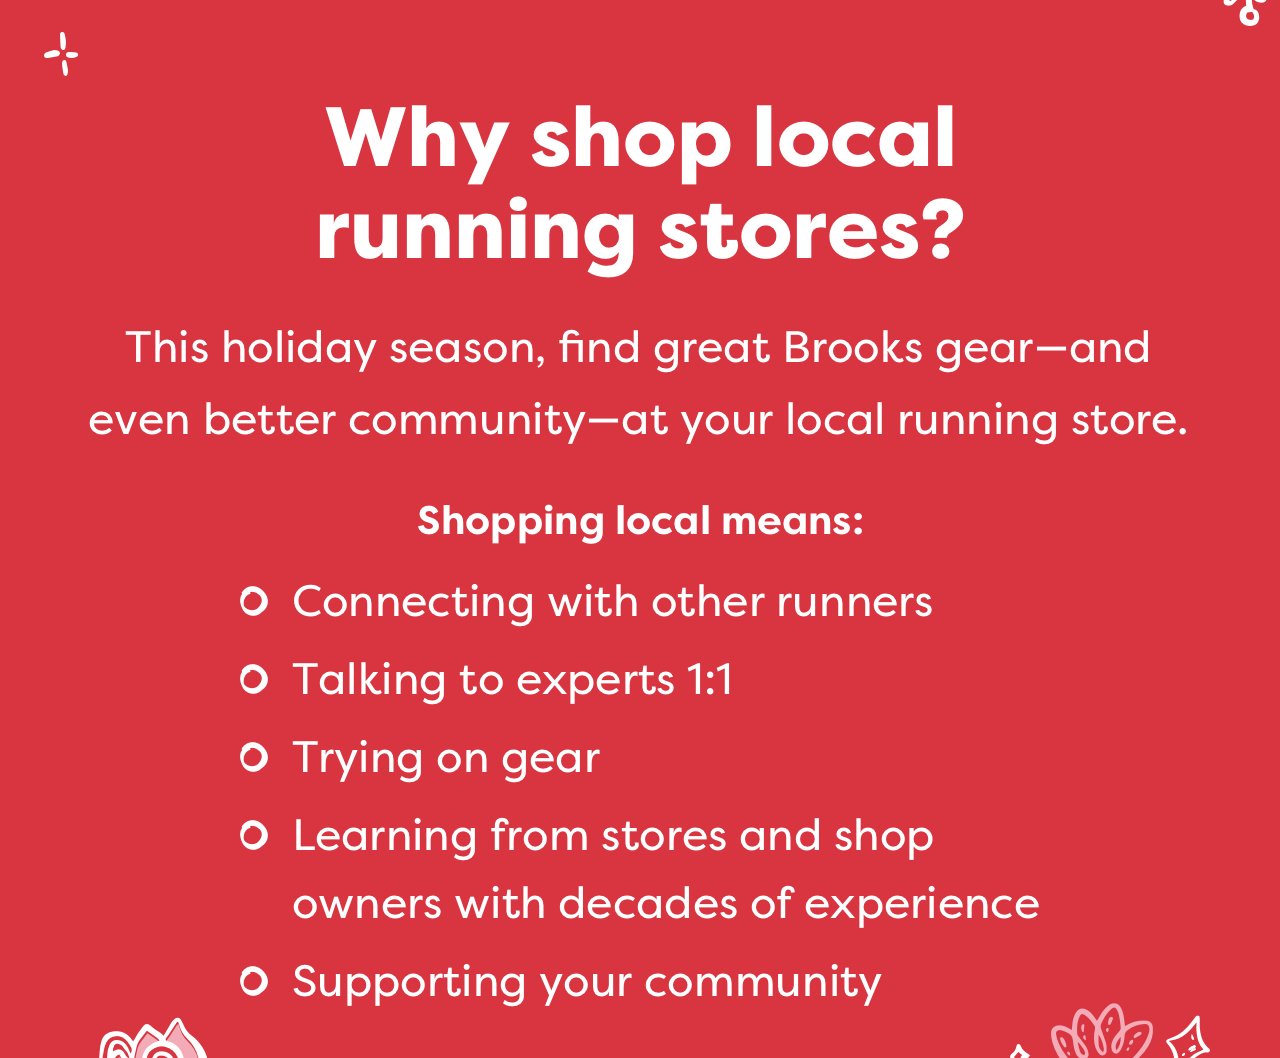 Why shop local running stores? | This holiday seasons, find great Brooks gear — and even better community — at your local running store. Shopping local means: 1. Connecting with other runners 2. Talking to experts 1:1 3. Trying on gear 4. Learning from stores and shop owners with decades of experience 5. Supporting your community